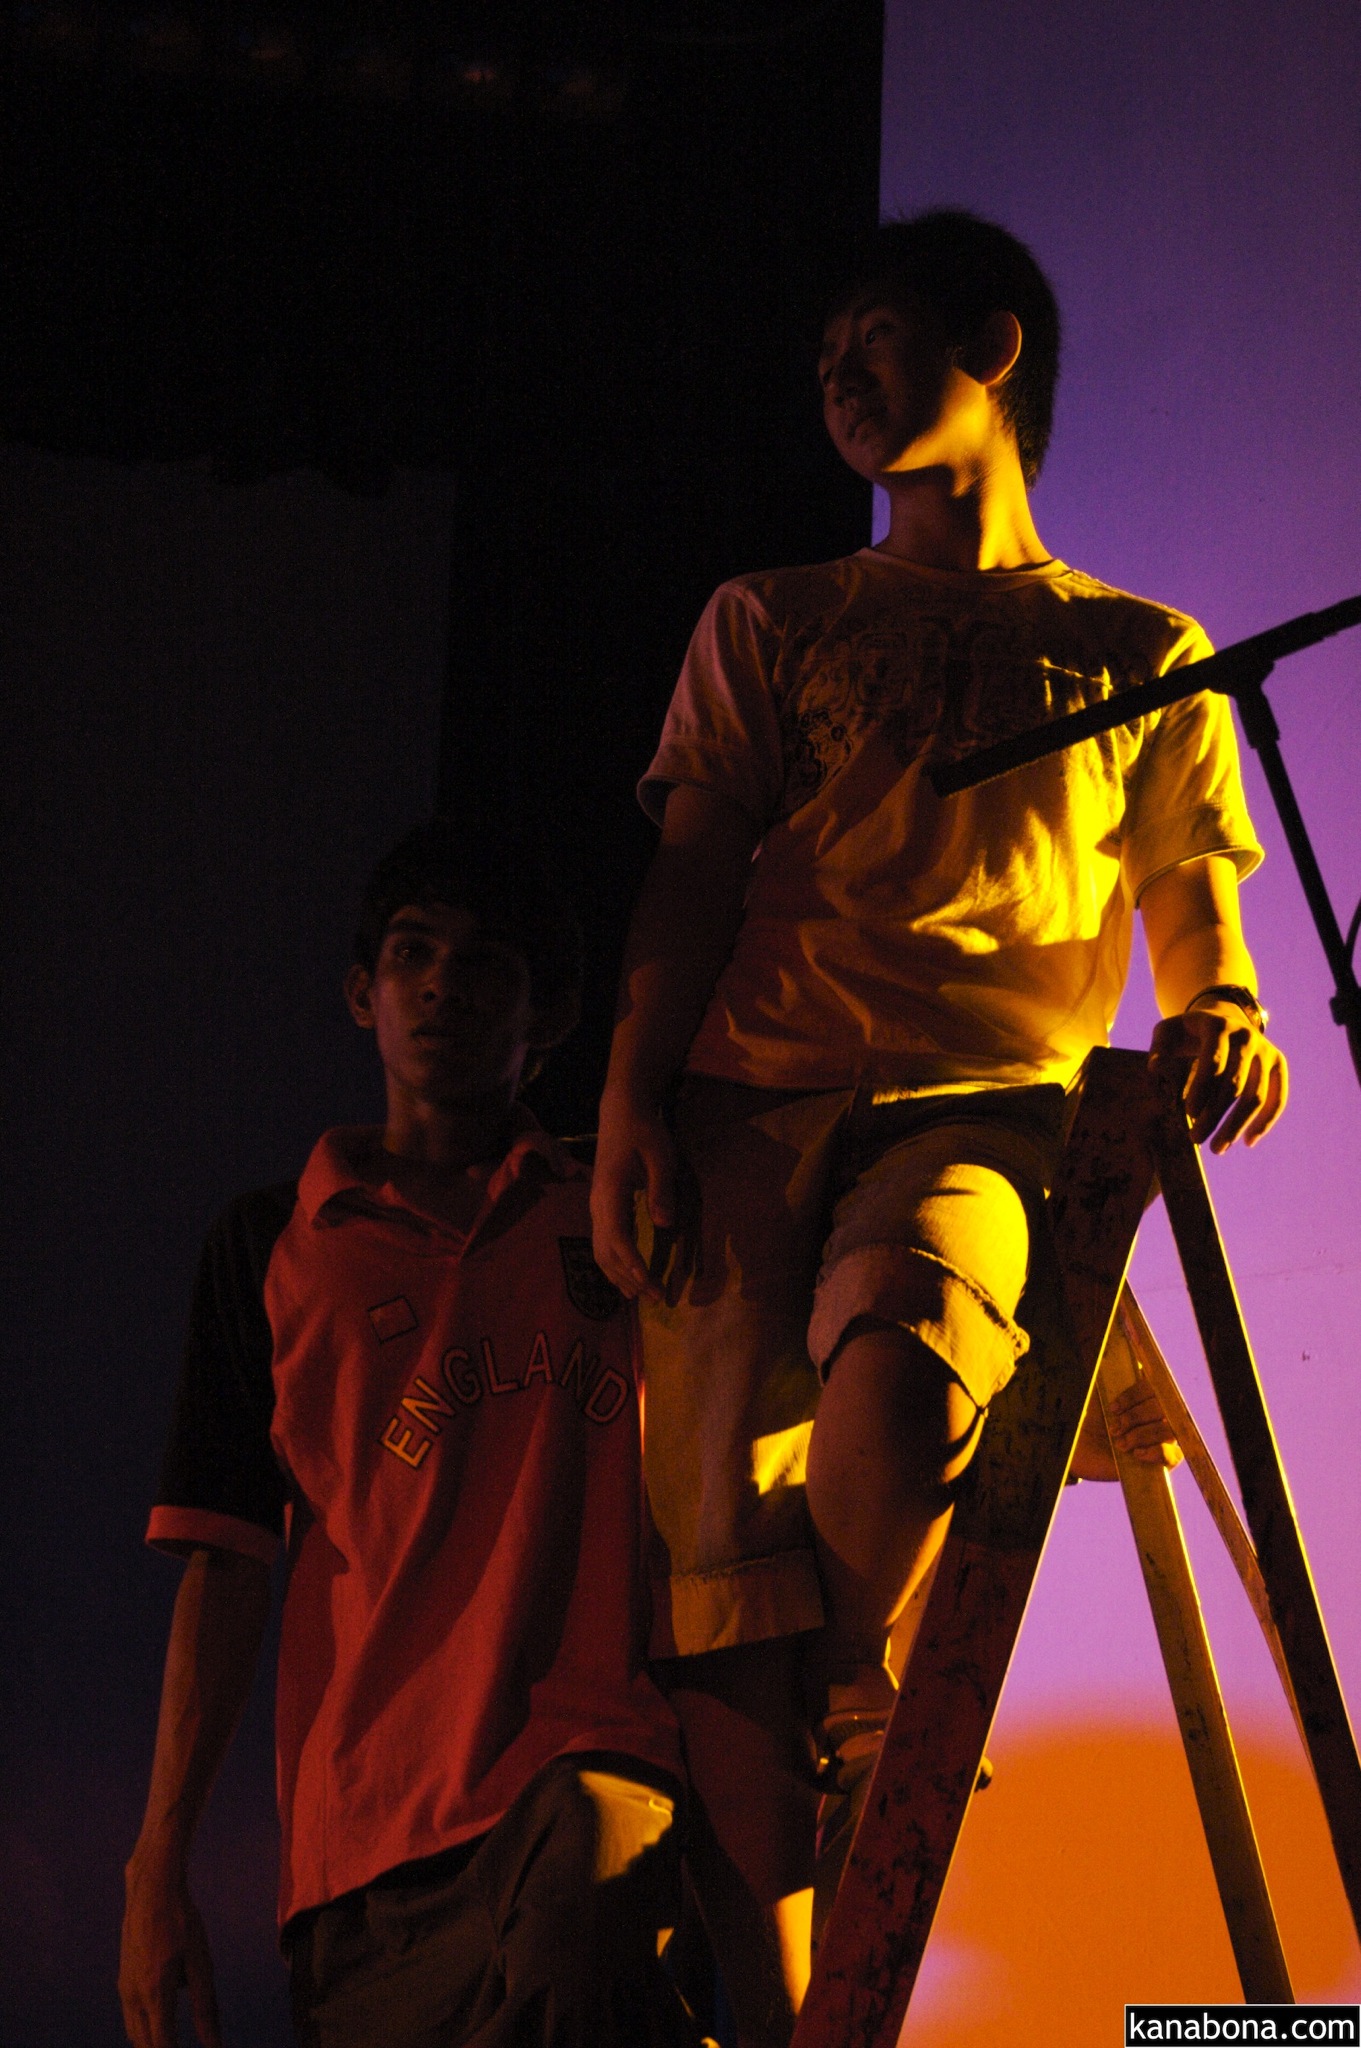 two boys, one on the left climbing up a ladder, watch over an audience